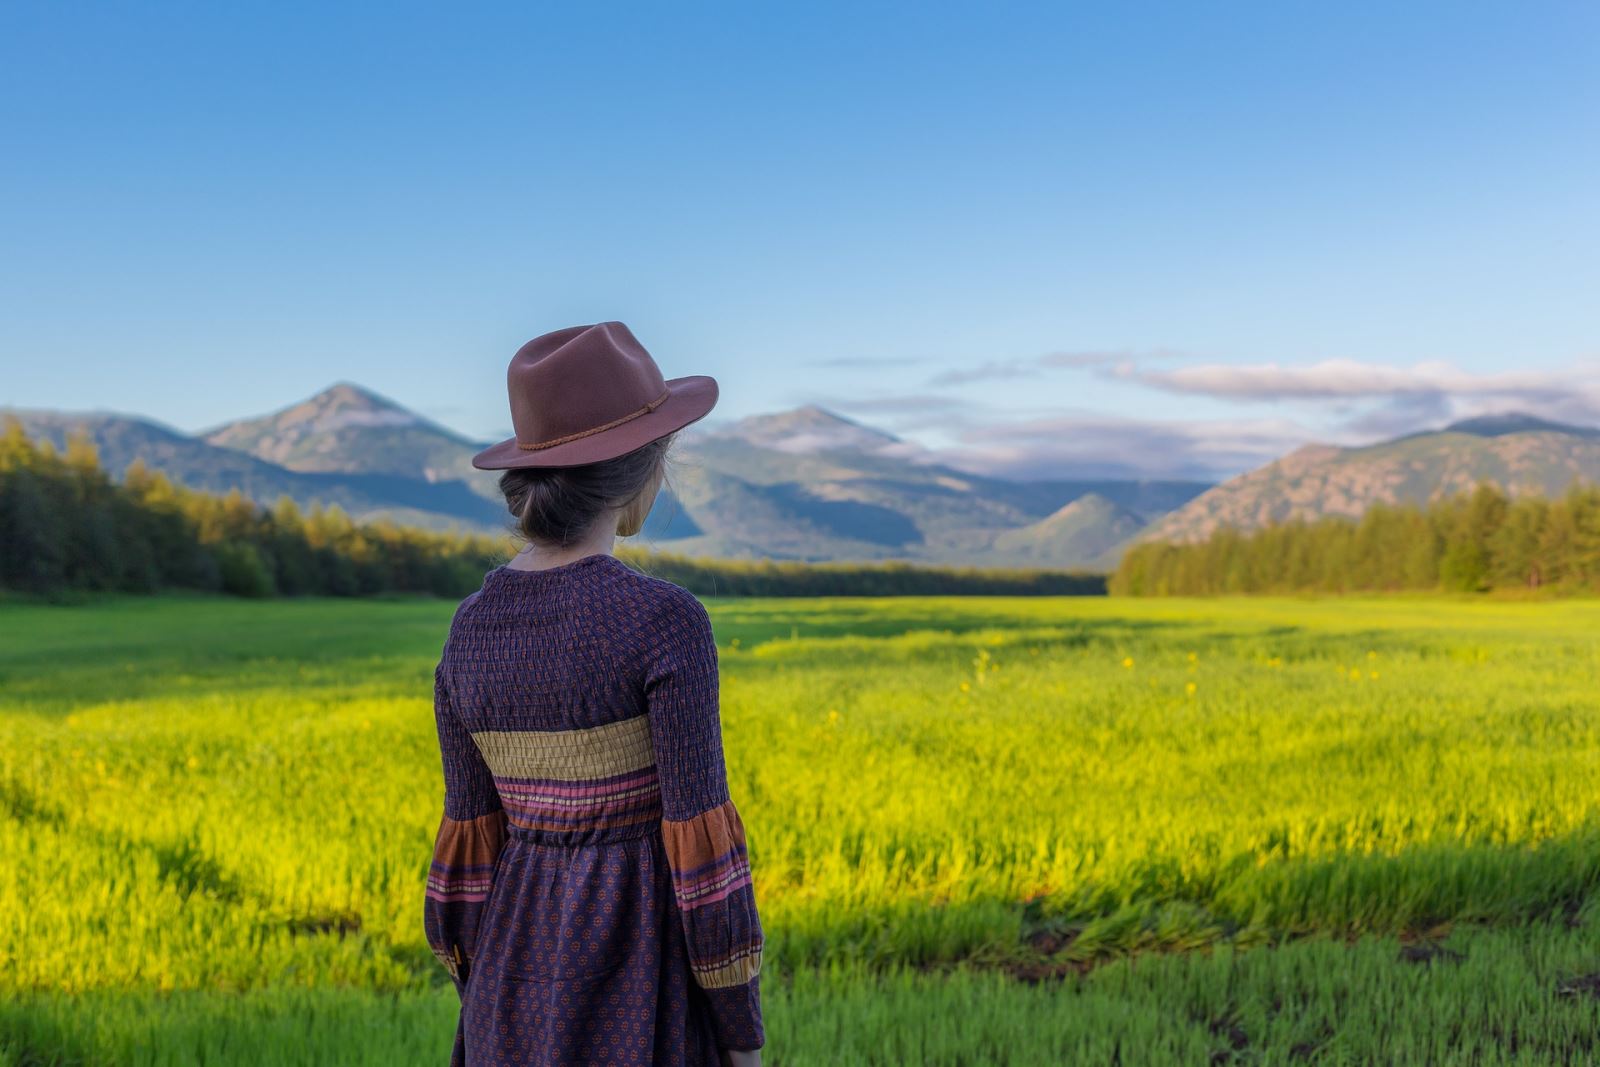 Girl looking out across a rural landscape